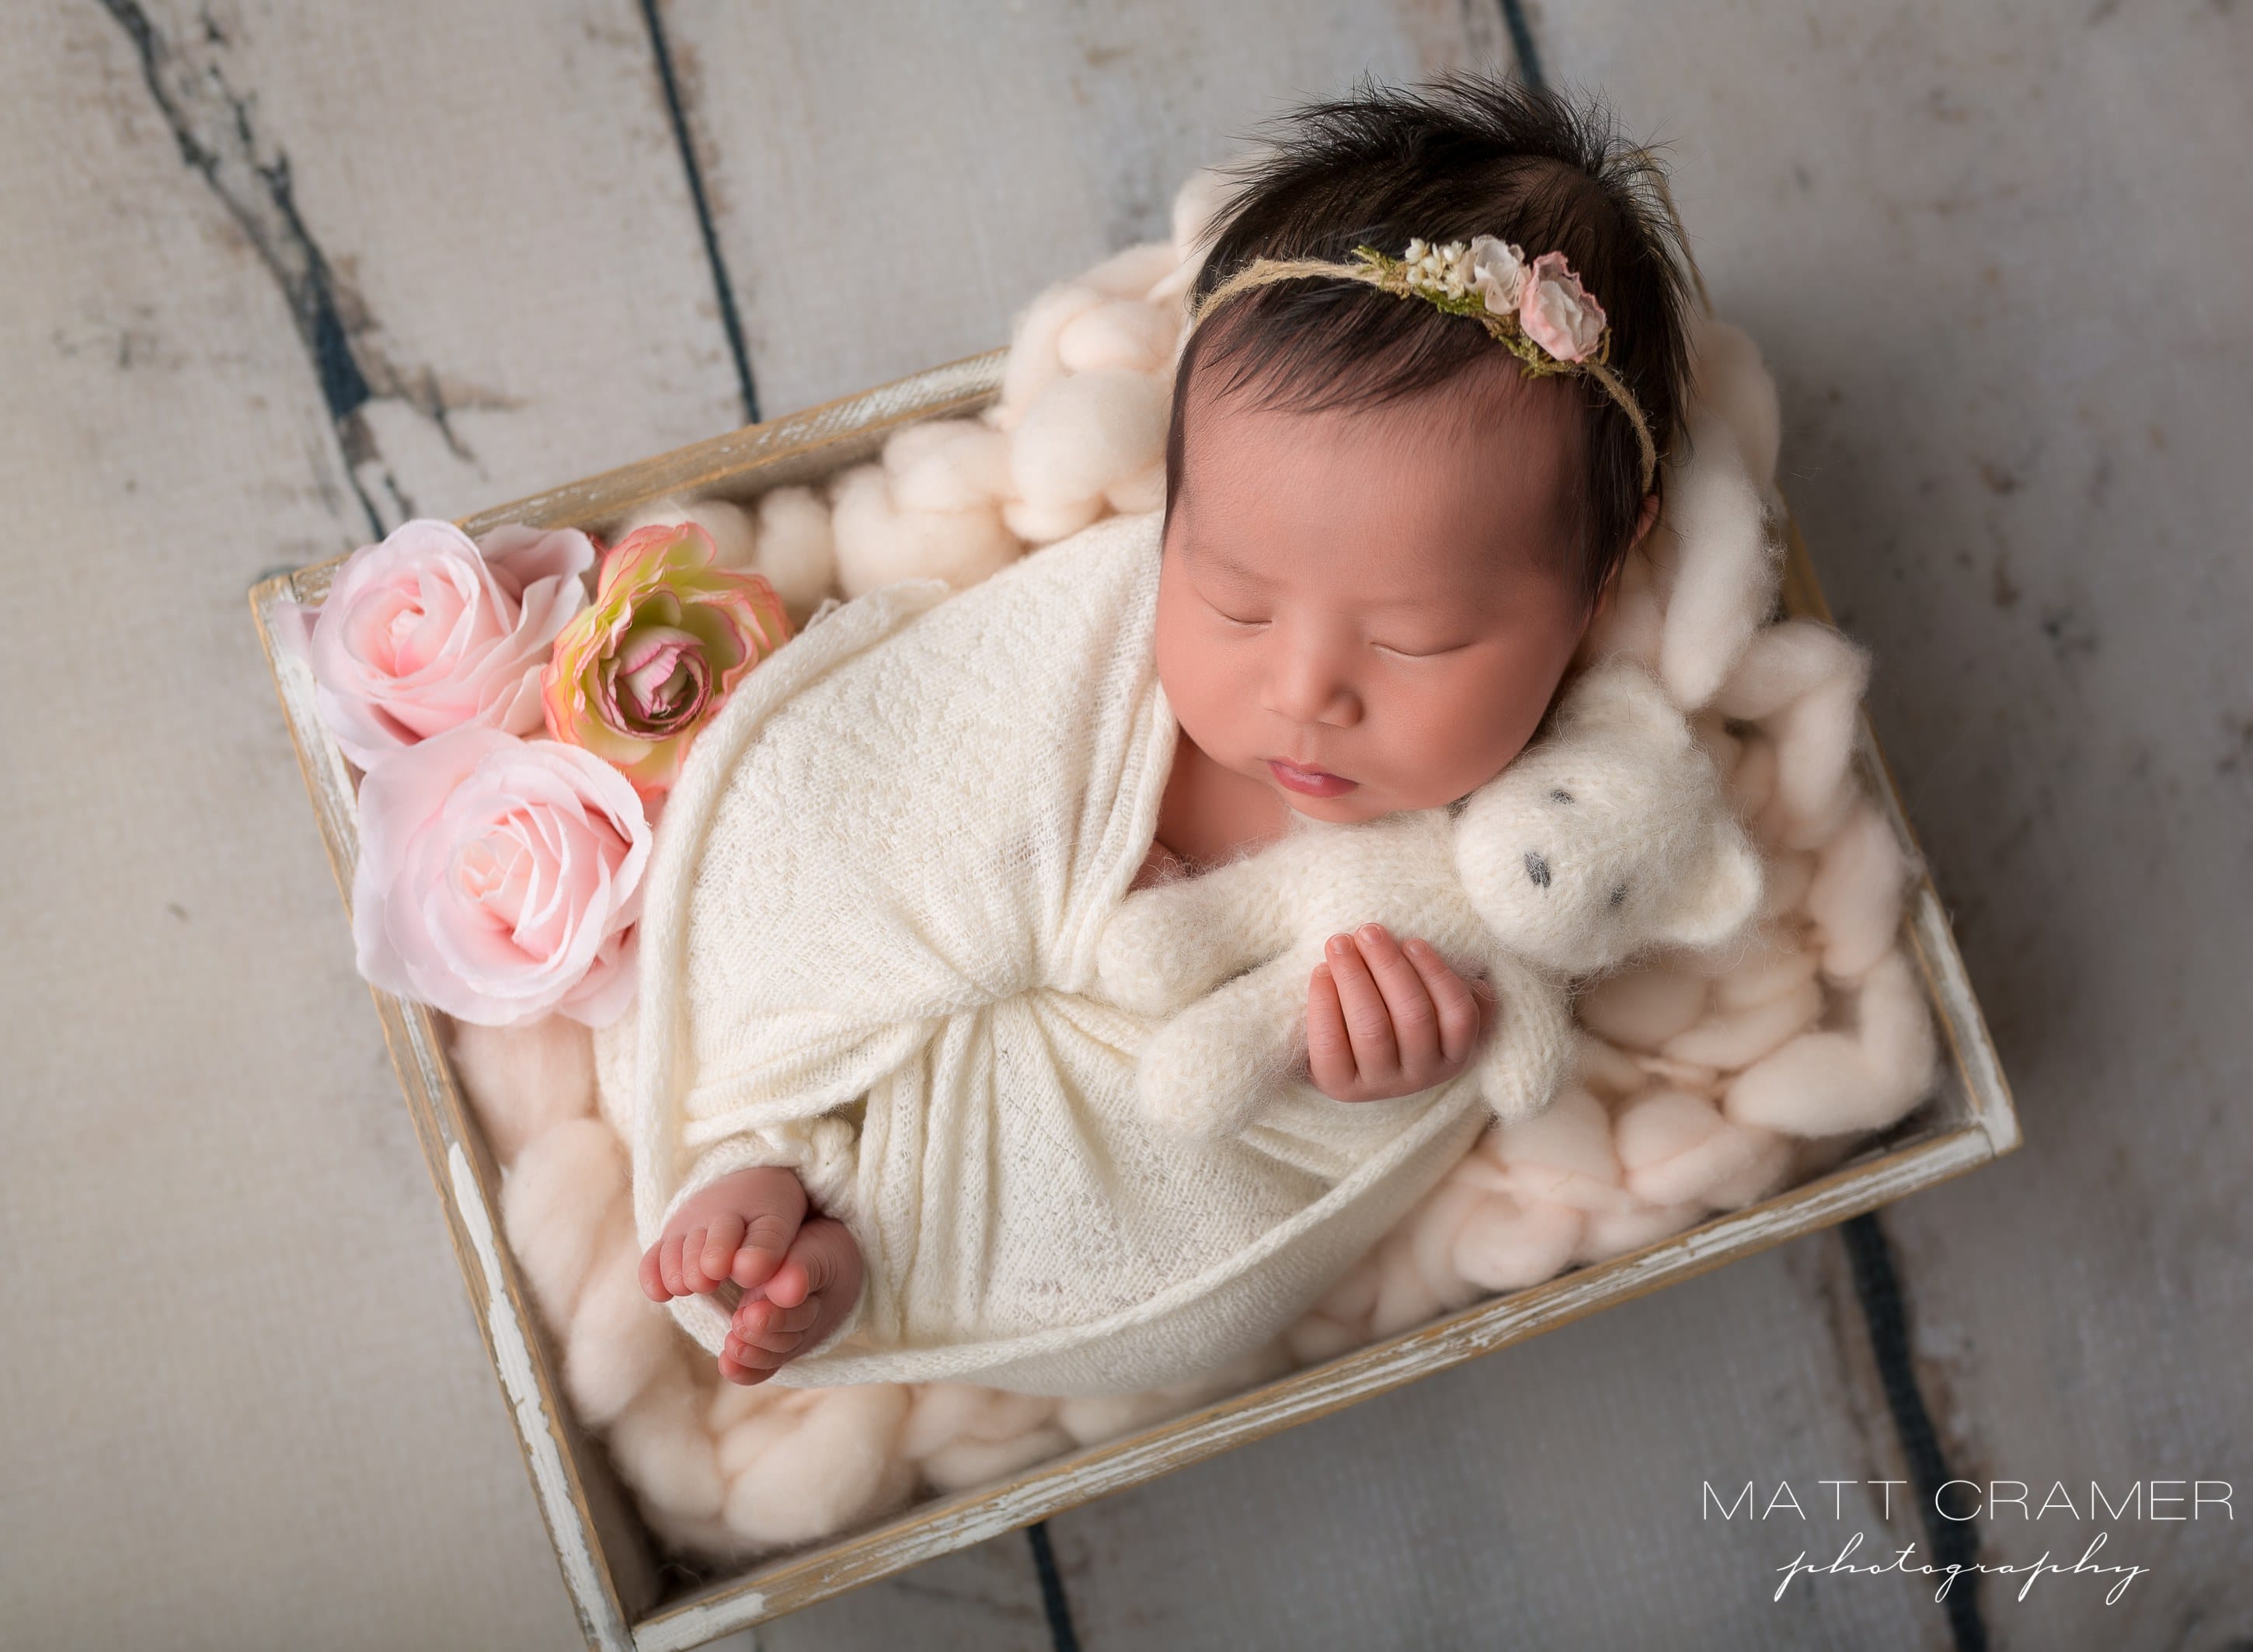 baby girl posed in white crate with pink flowers holding teddy bear